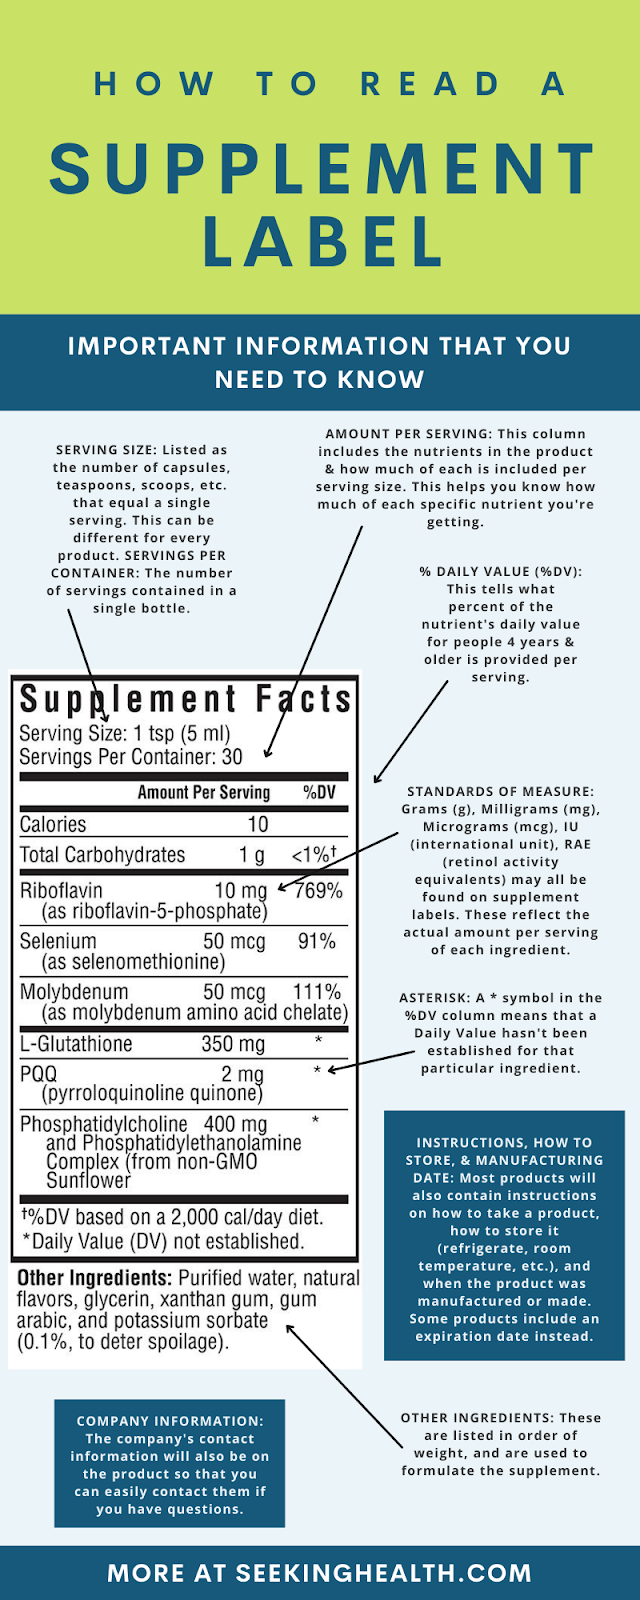 How to Read a Supplement Label_Infographic